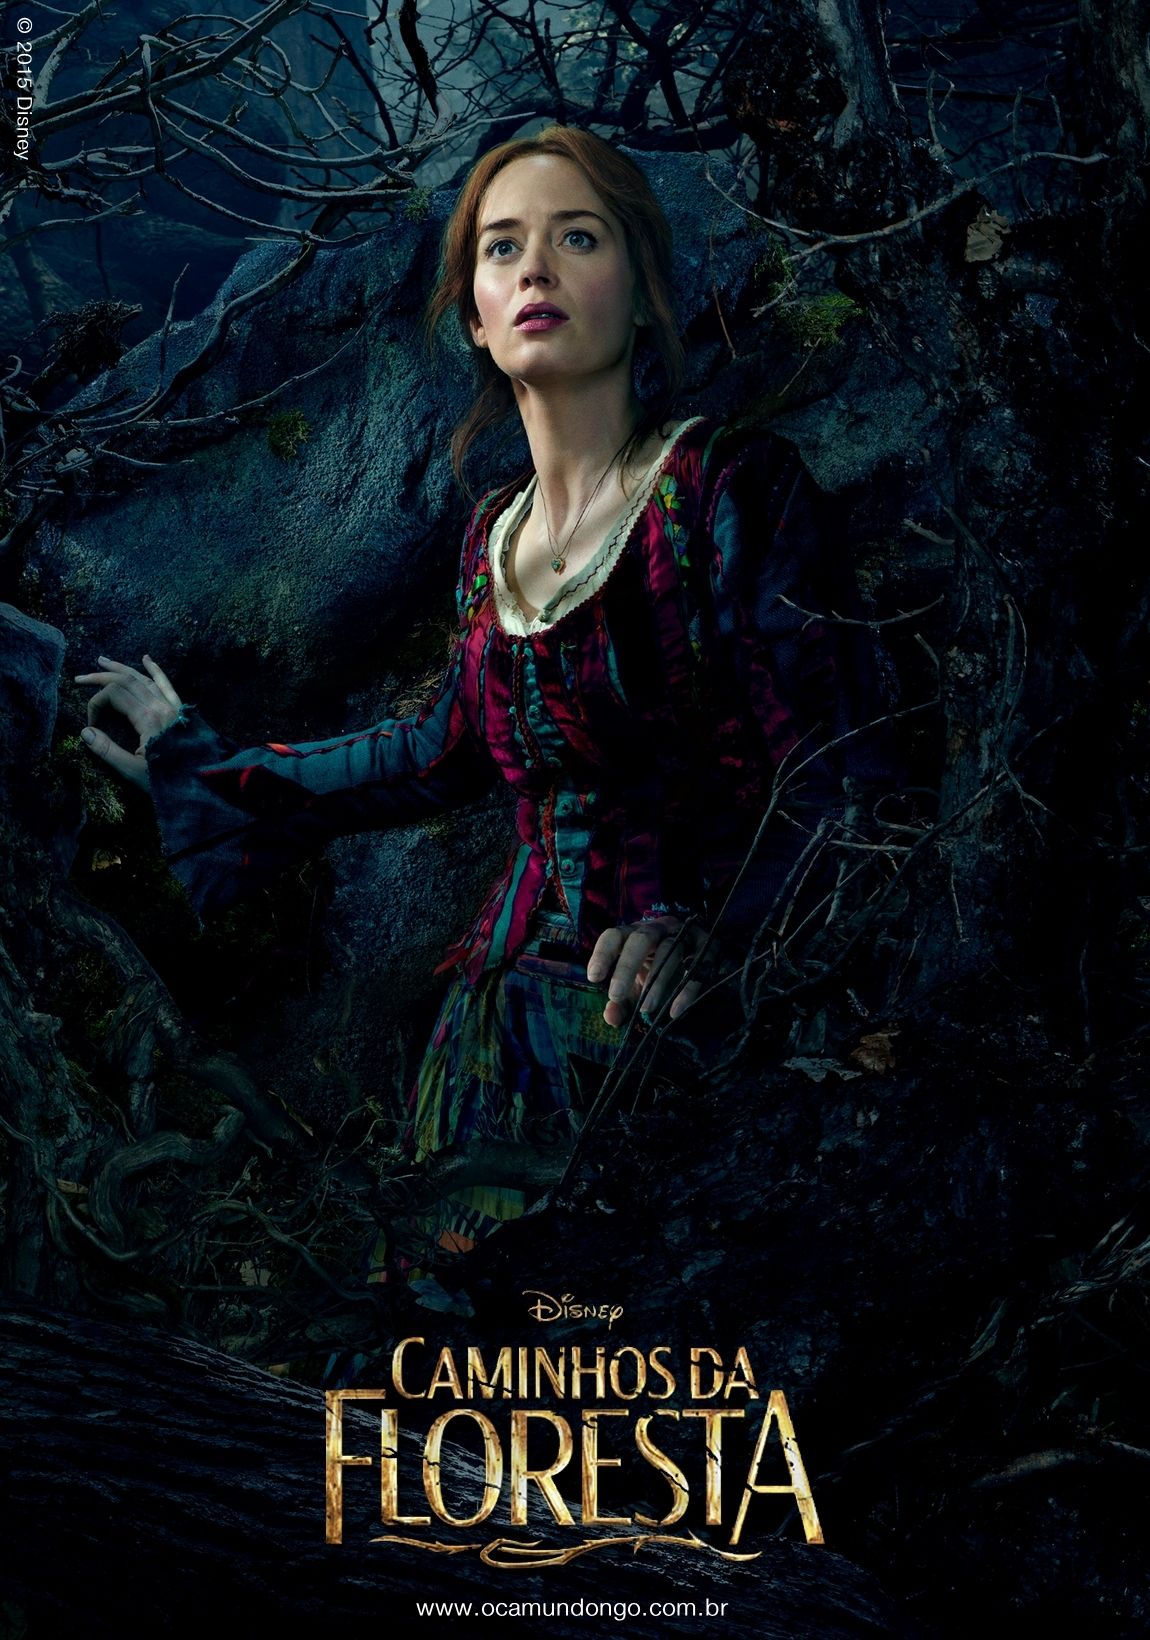 into-the-woods-poster-esposa-camundongo